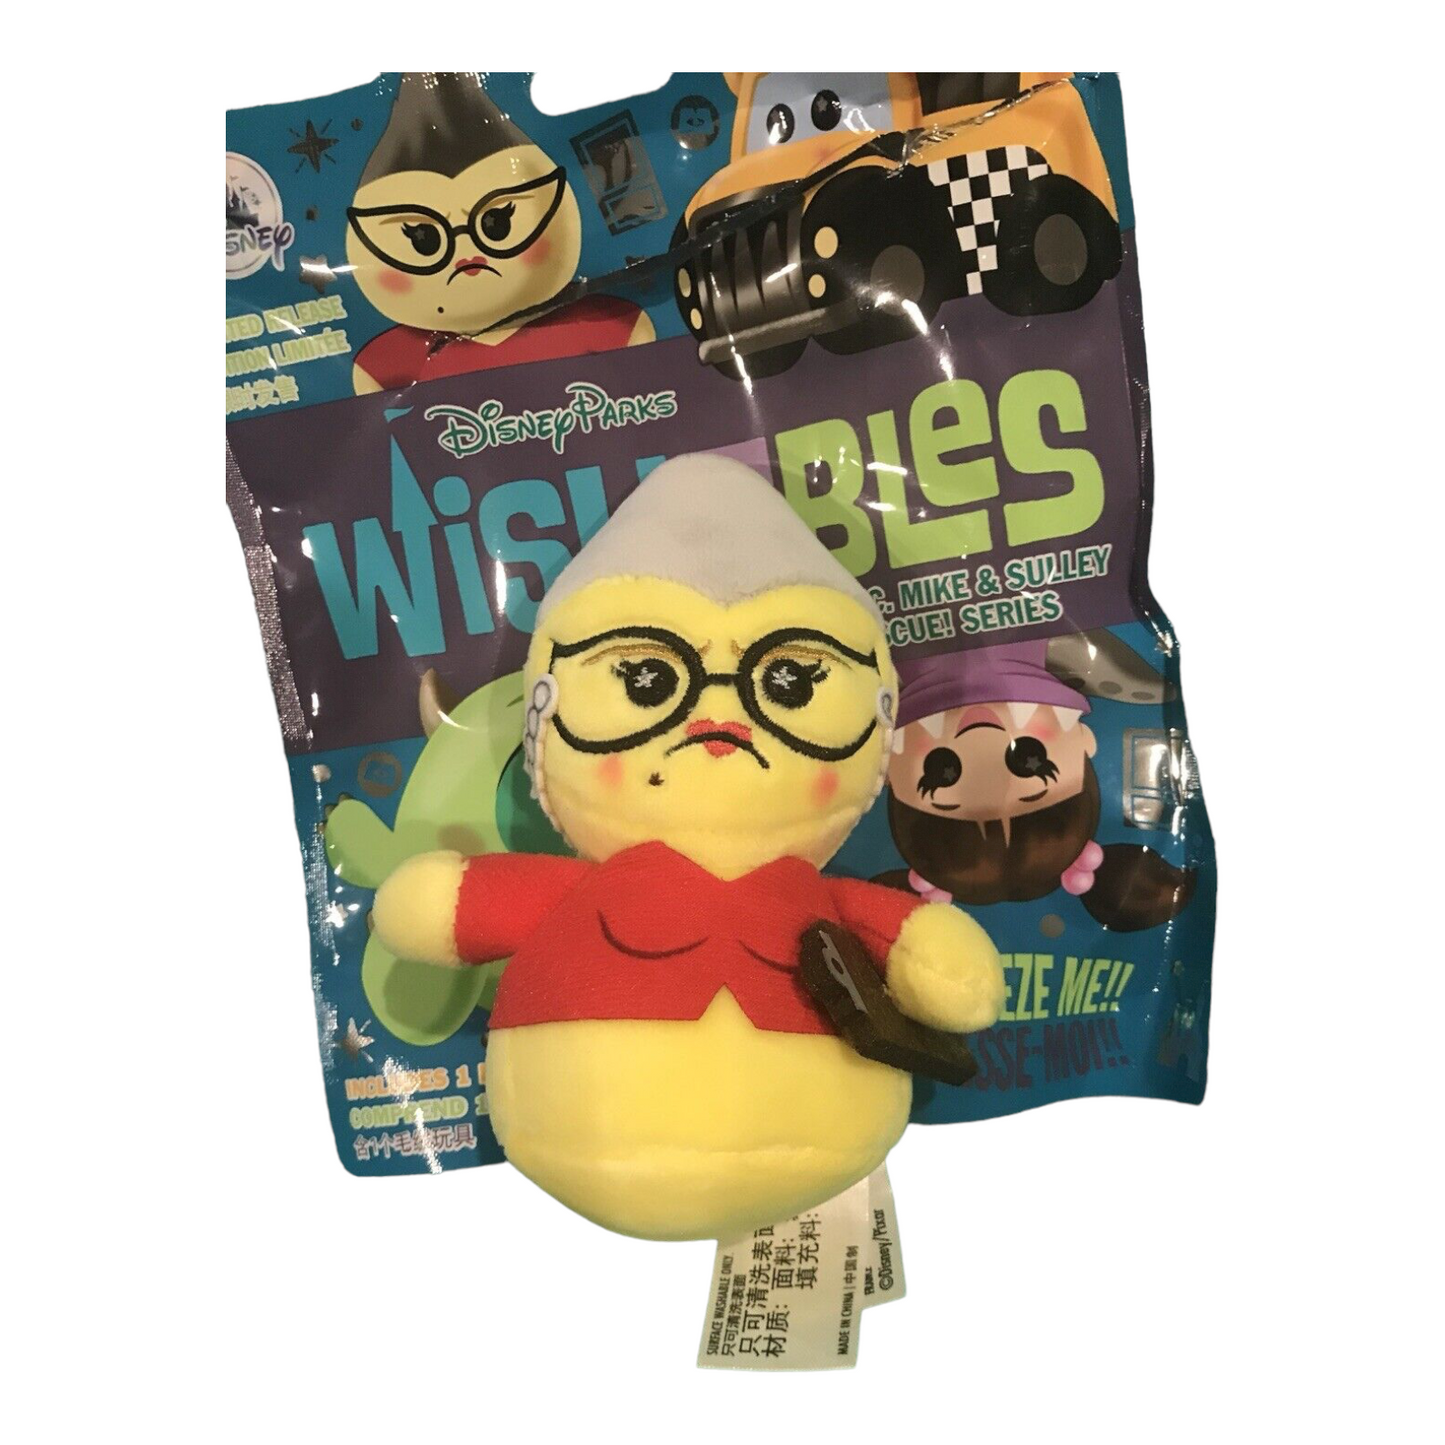 Roz - Monsters, Inc. Mike & Sulley to the Rescue! Series Wishables Mystery Plush -Limited Release